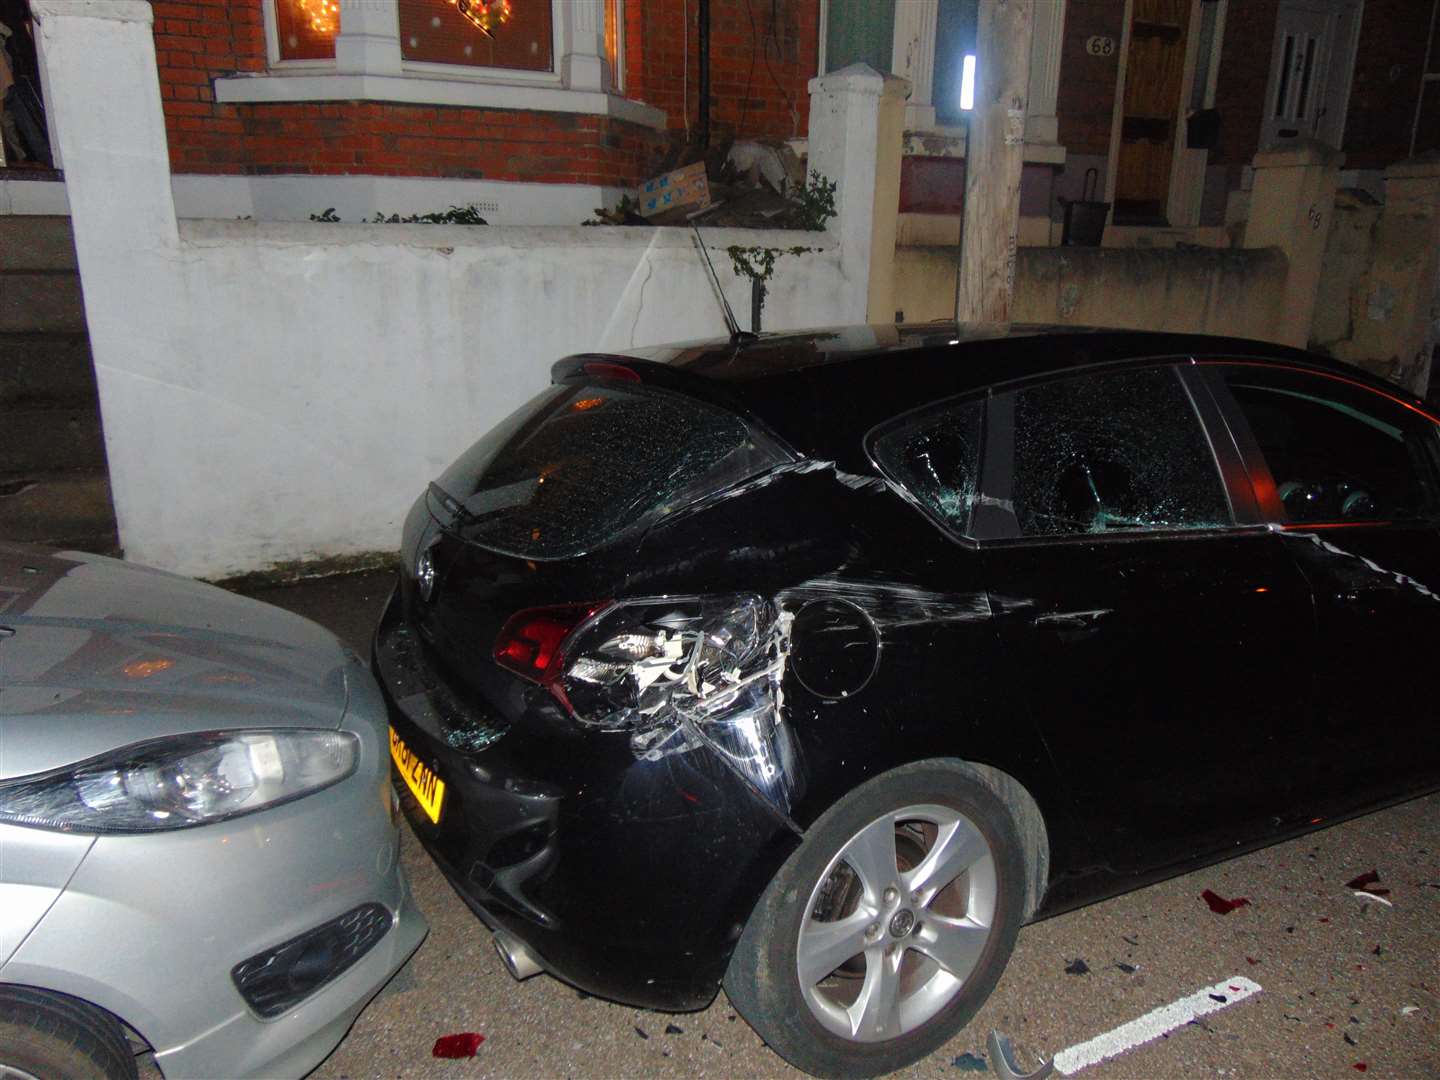 One of the cars damaged by Aaron Salt